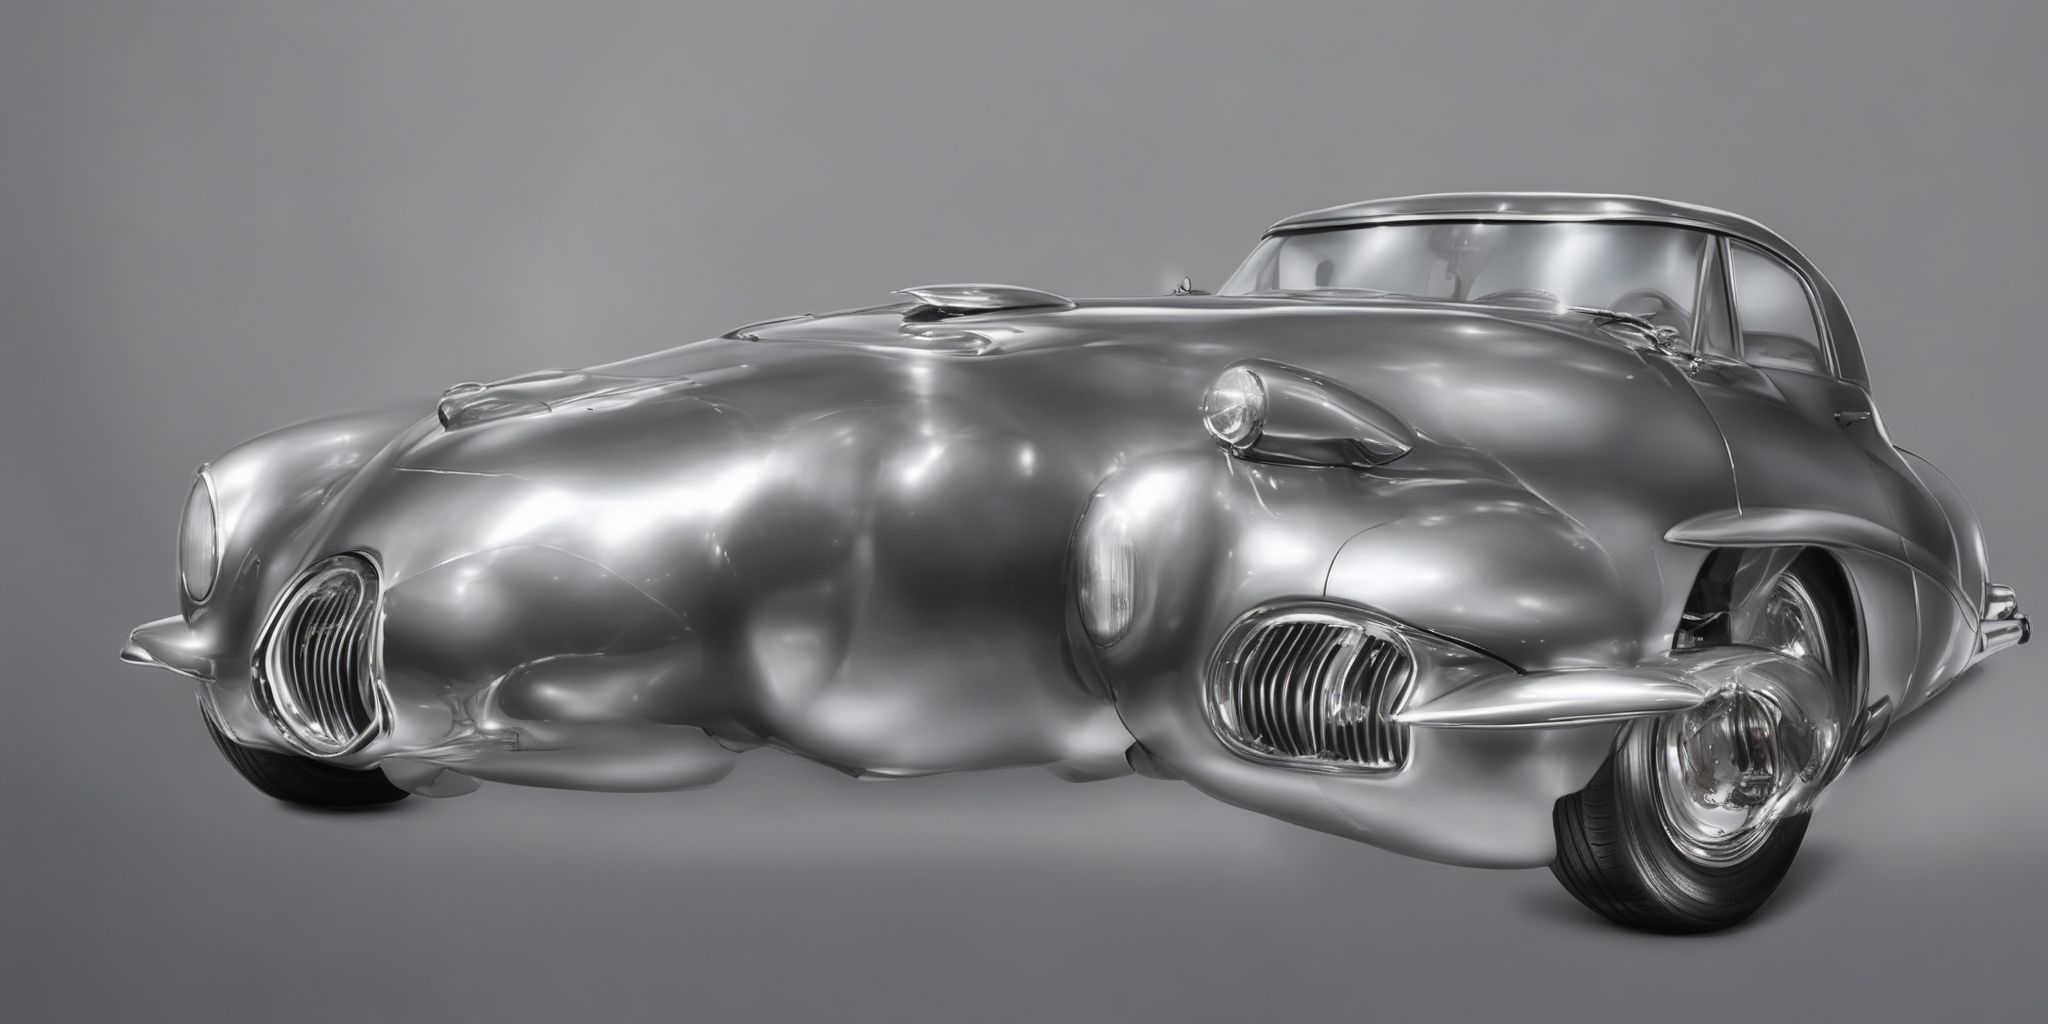 Silver bullet  in realistic, photographic style